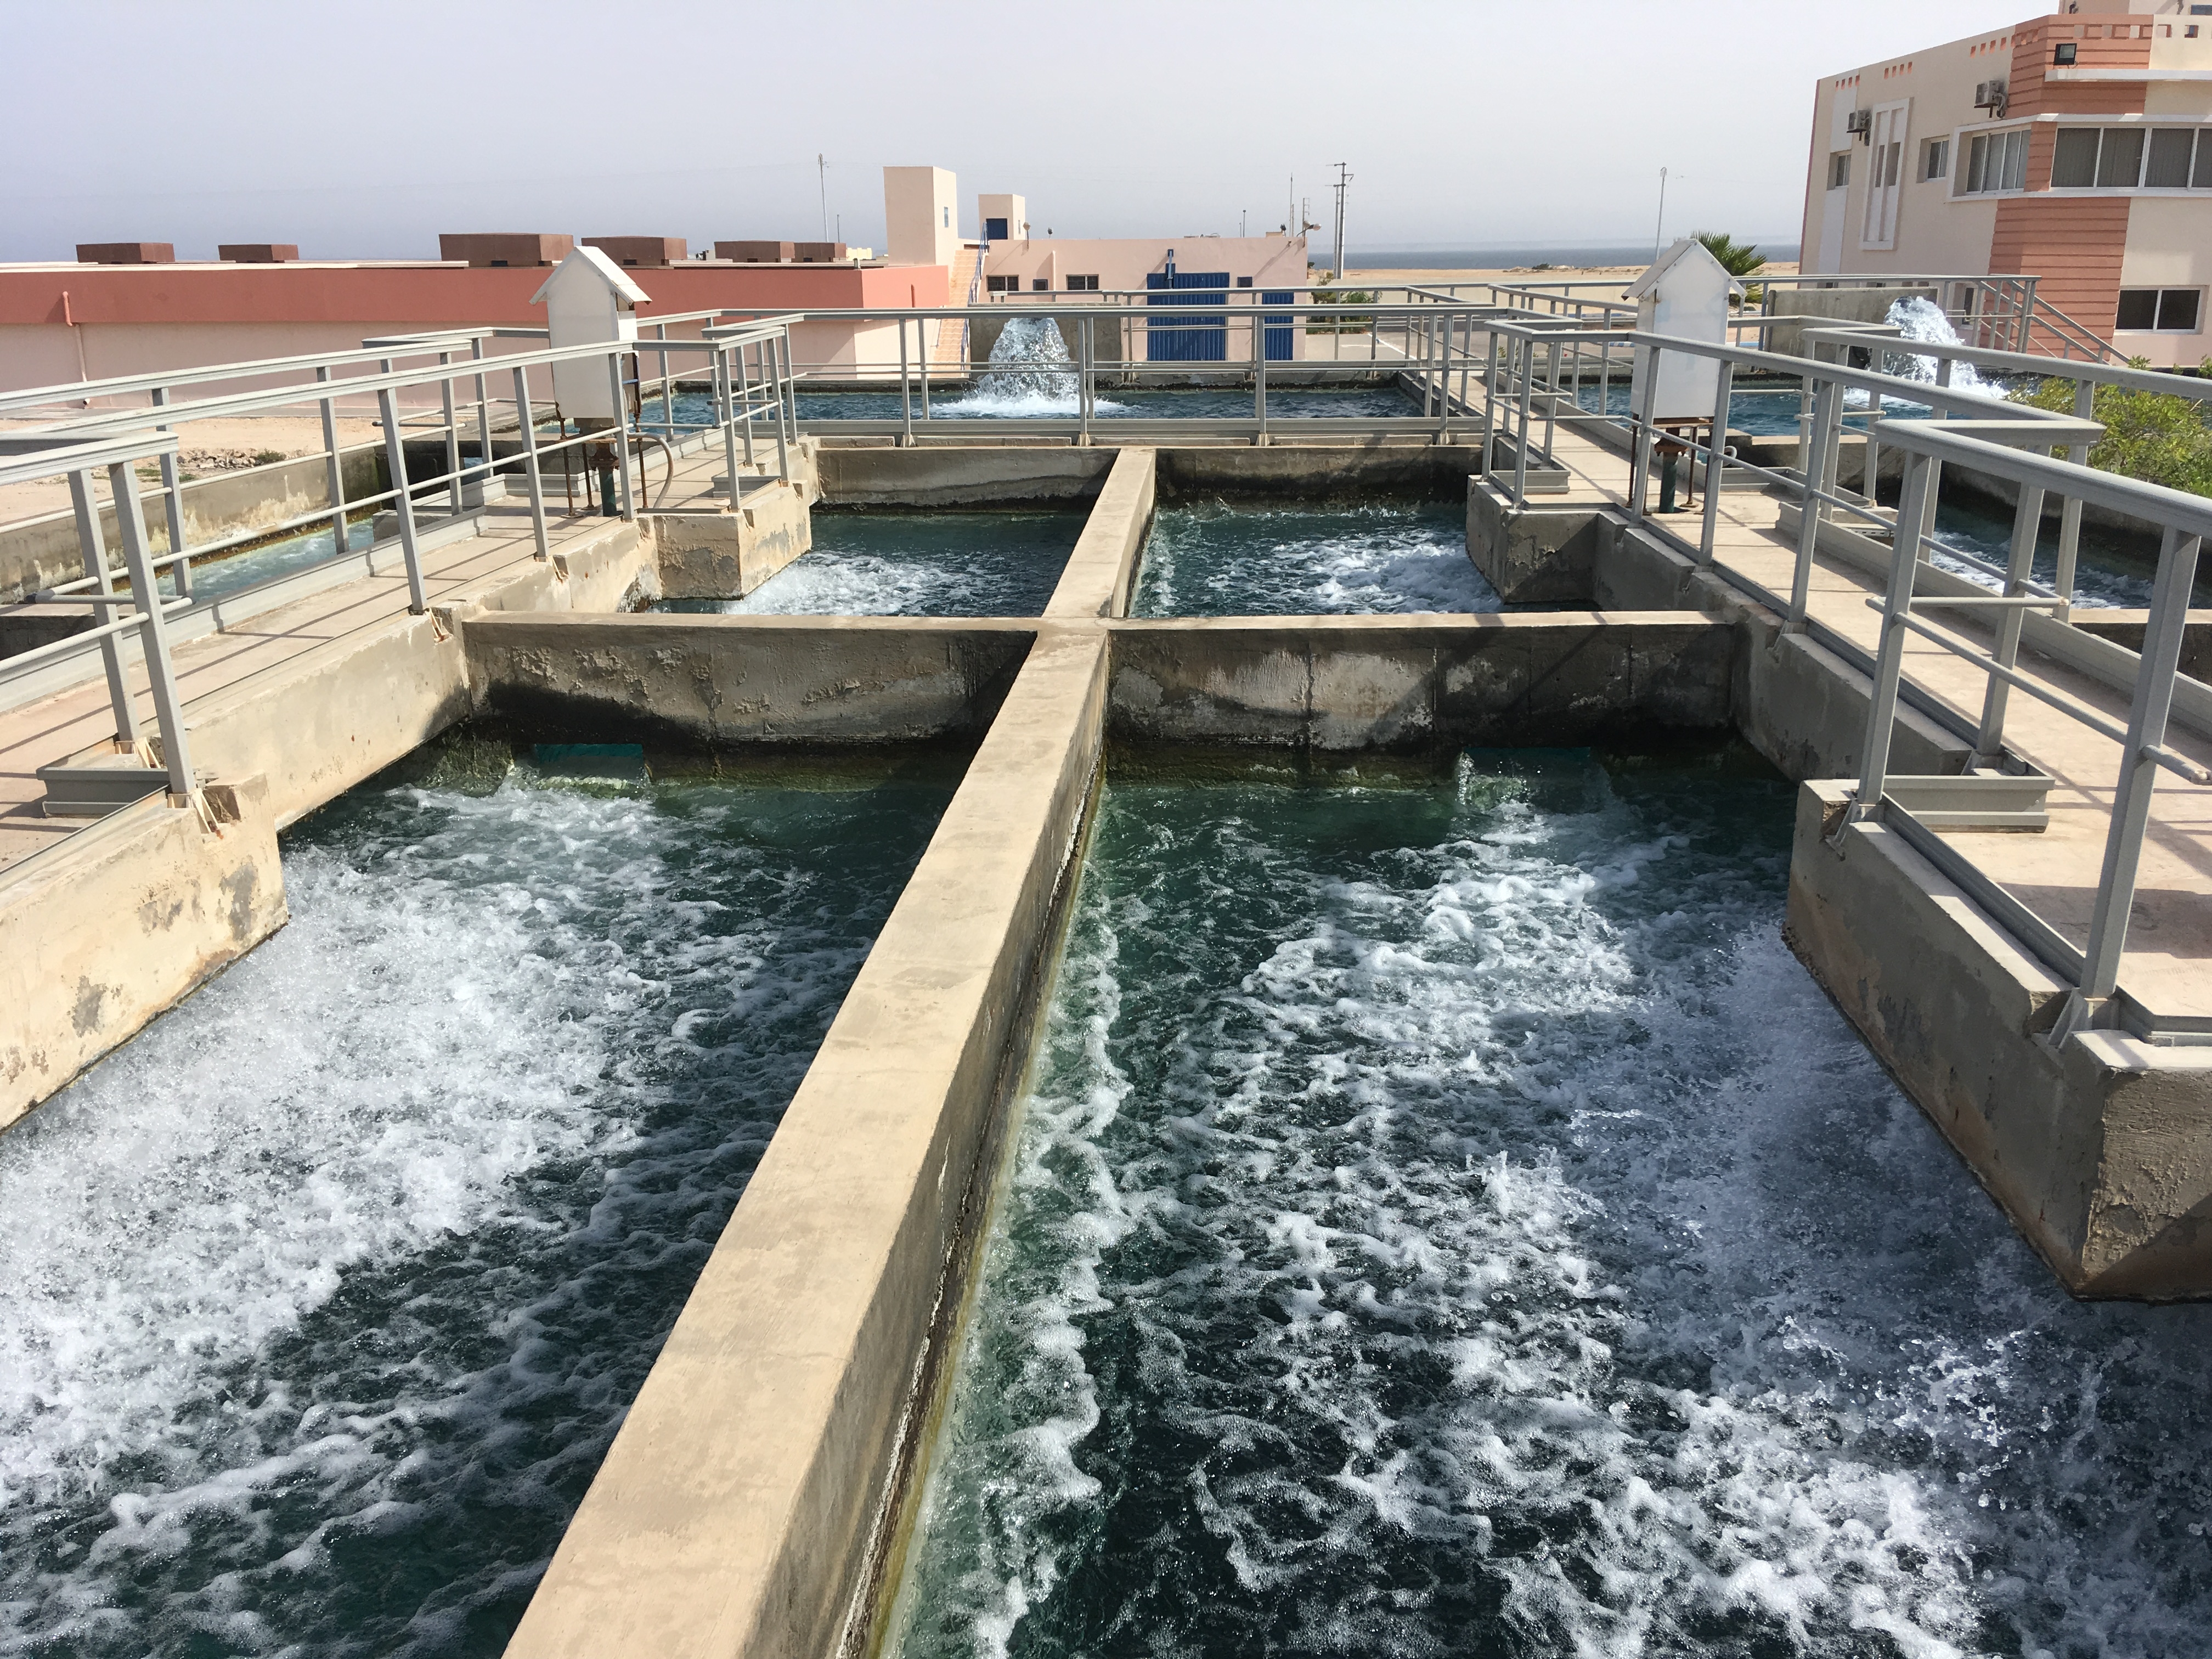 A water treatment plant in Dakhla, where the water table is very deep and the aquifer is not recharging fast enough.